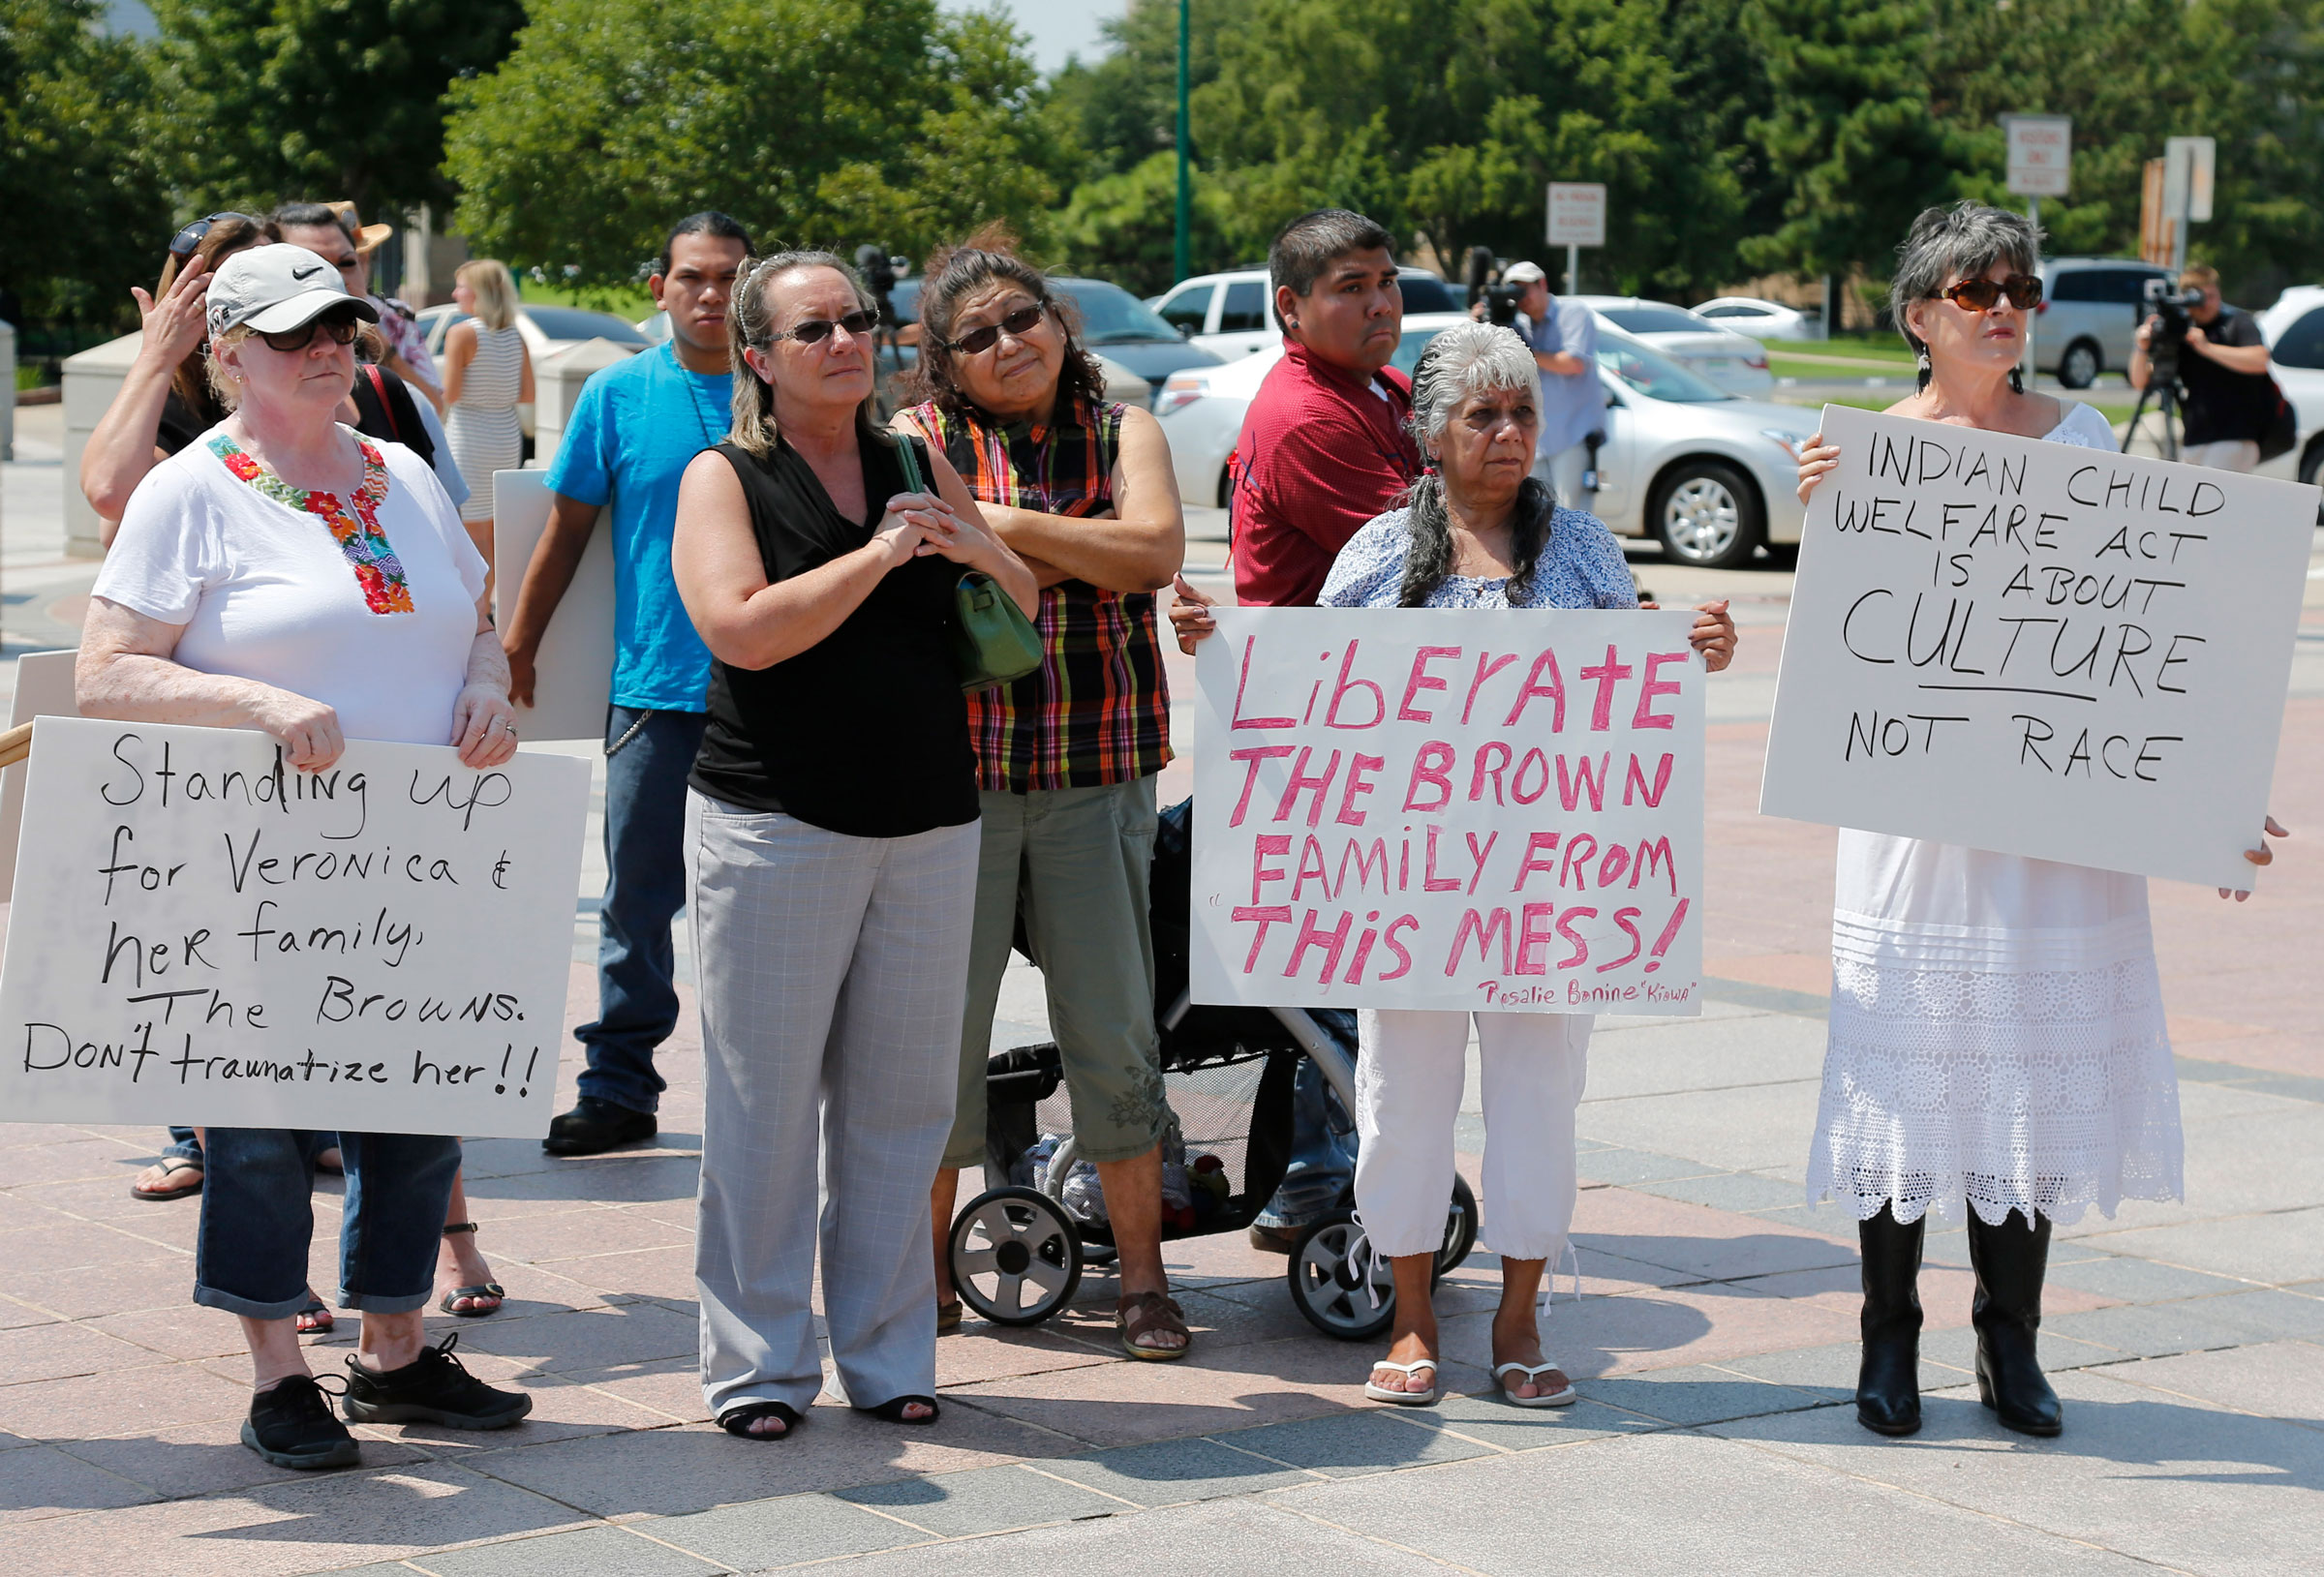 Participants listen during a rally in support of the Indian Child Welfare Act, in Oklahoma City, on Aug. 19, 2013, after the Supreme Court’s decision in <em>Adoptive Couple v. Baby Girl</em>. (Sue Ogrocki—AP)